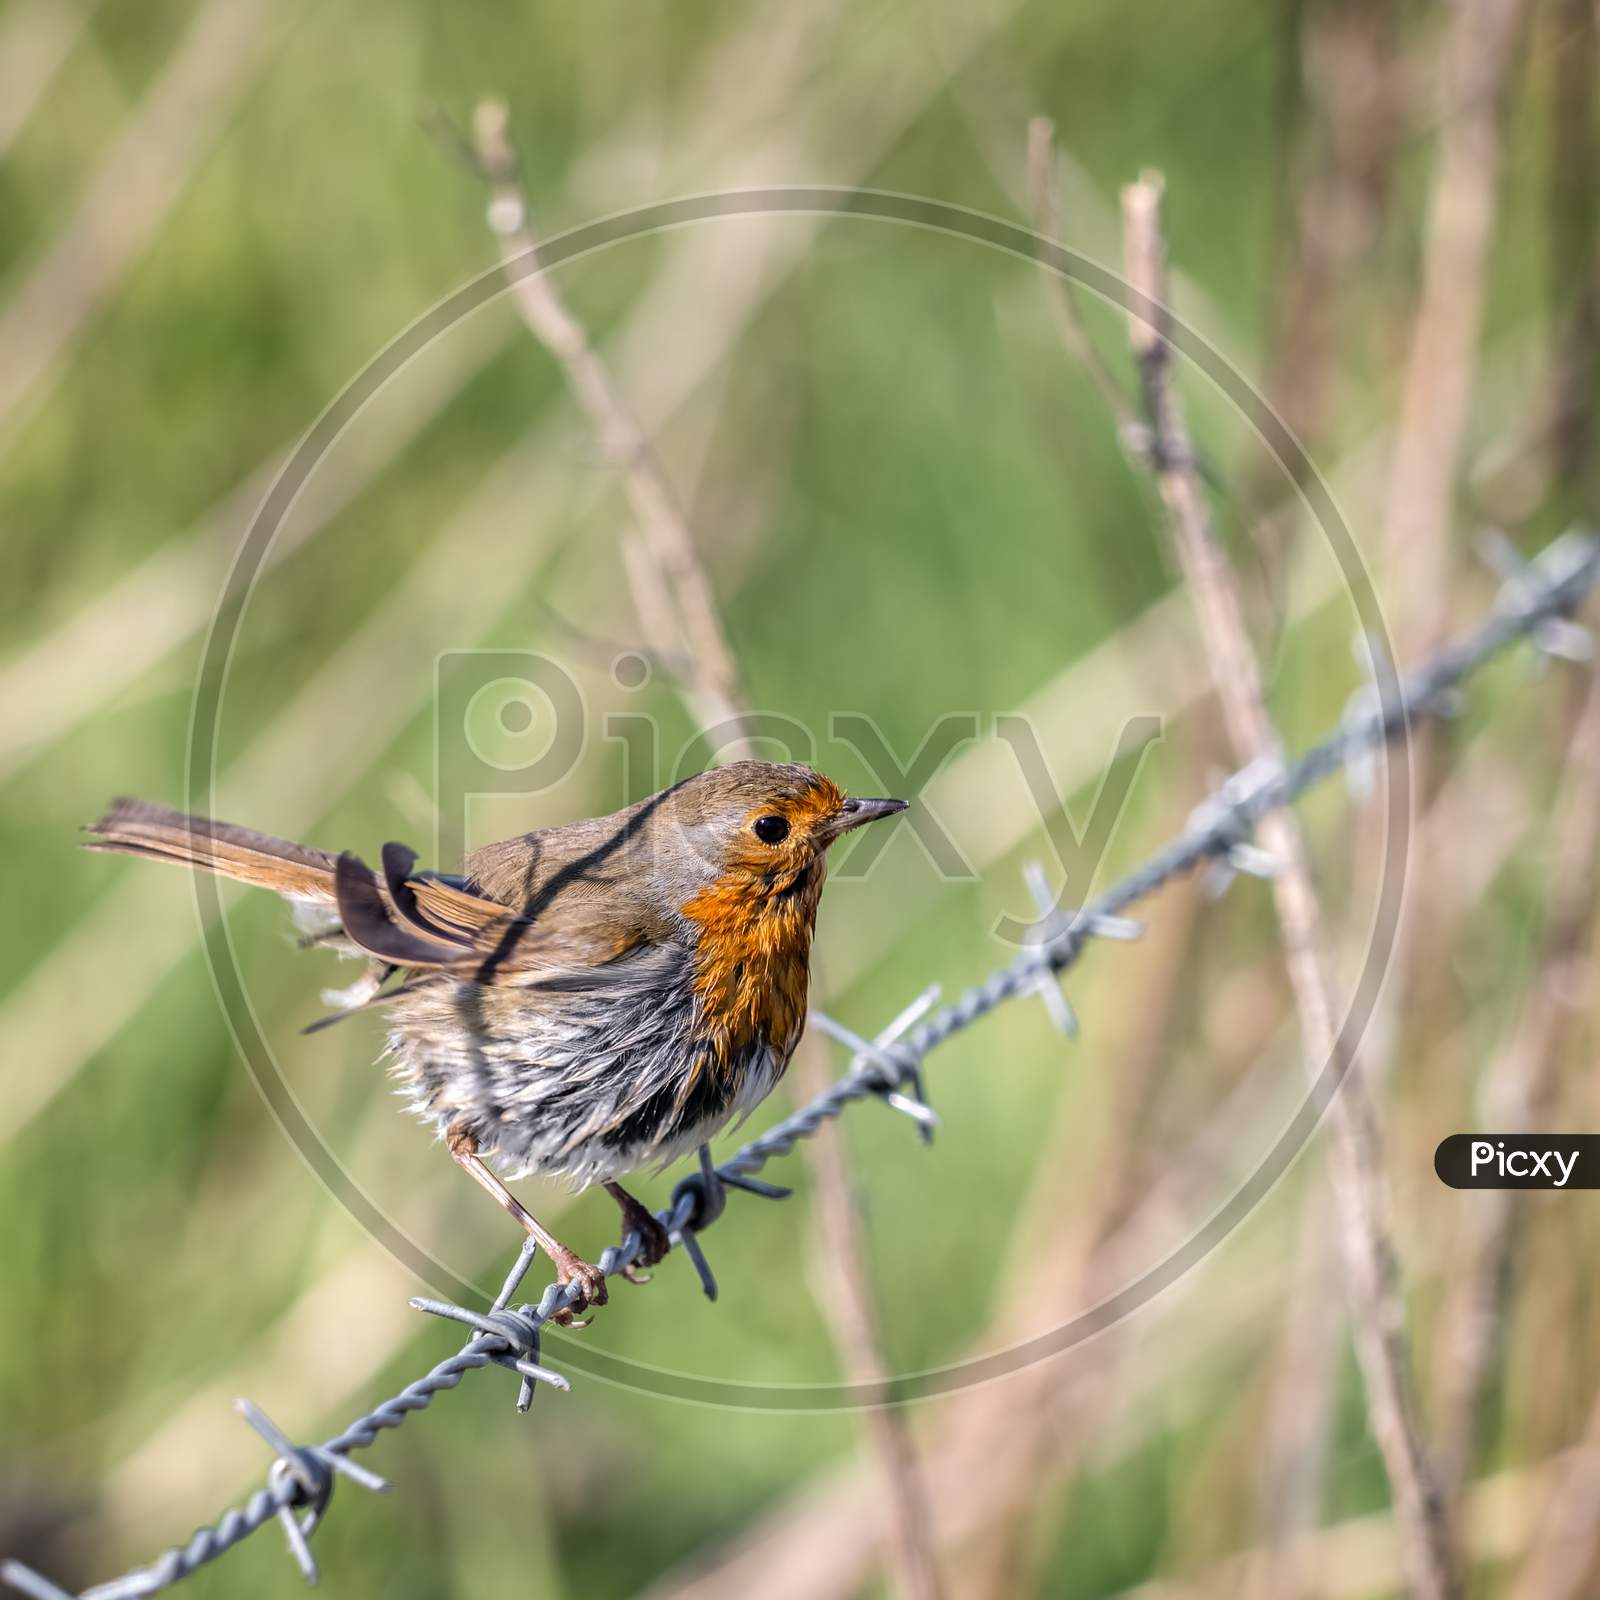 Mystery Of The Wet Robin Perched On A Barbed Wire Fence On A Sunny Spring Day